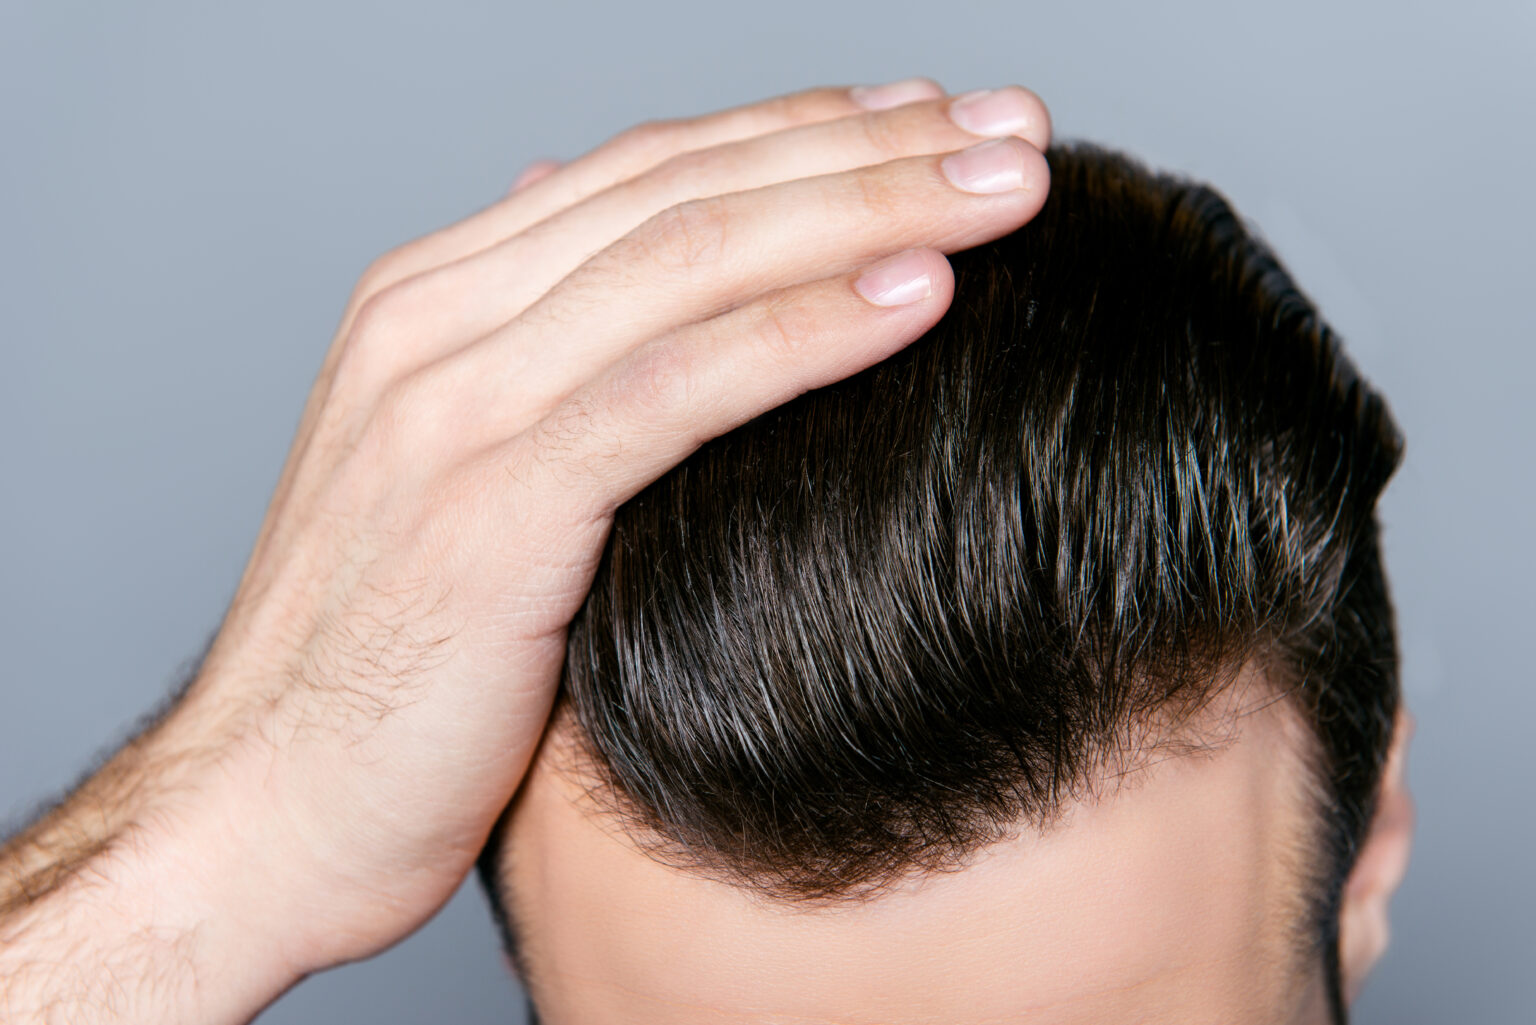 Why Does Hair Loss Occur?